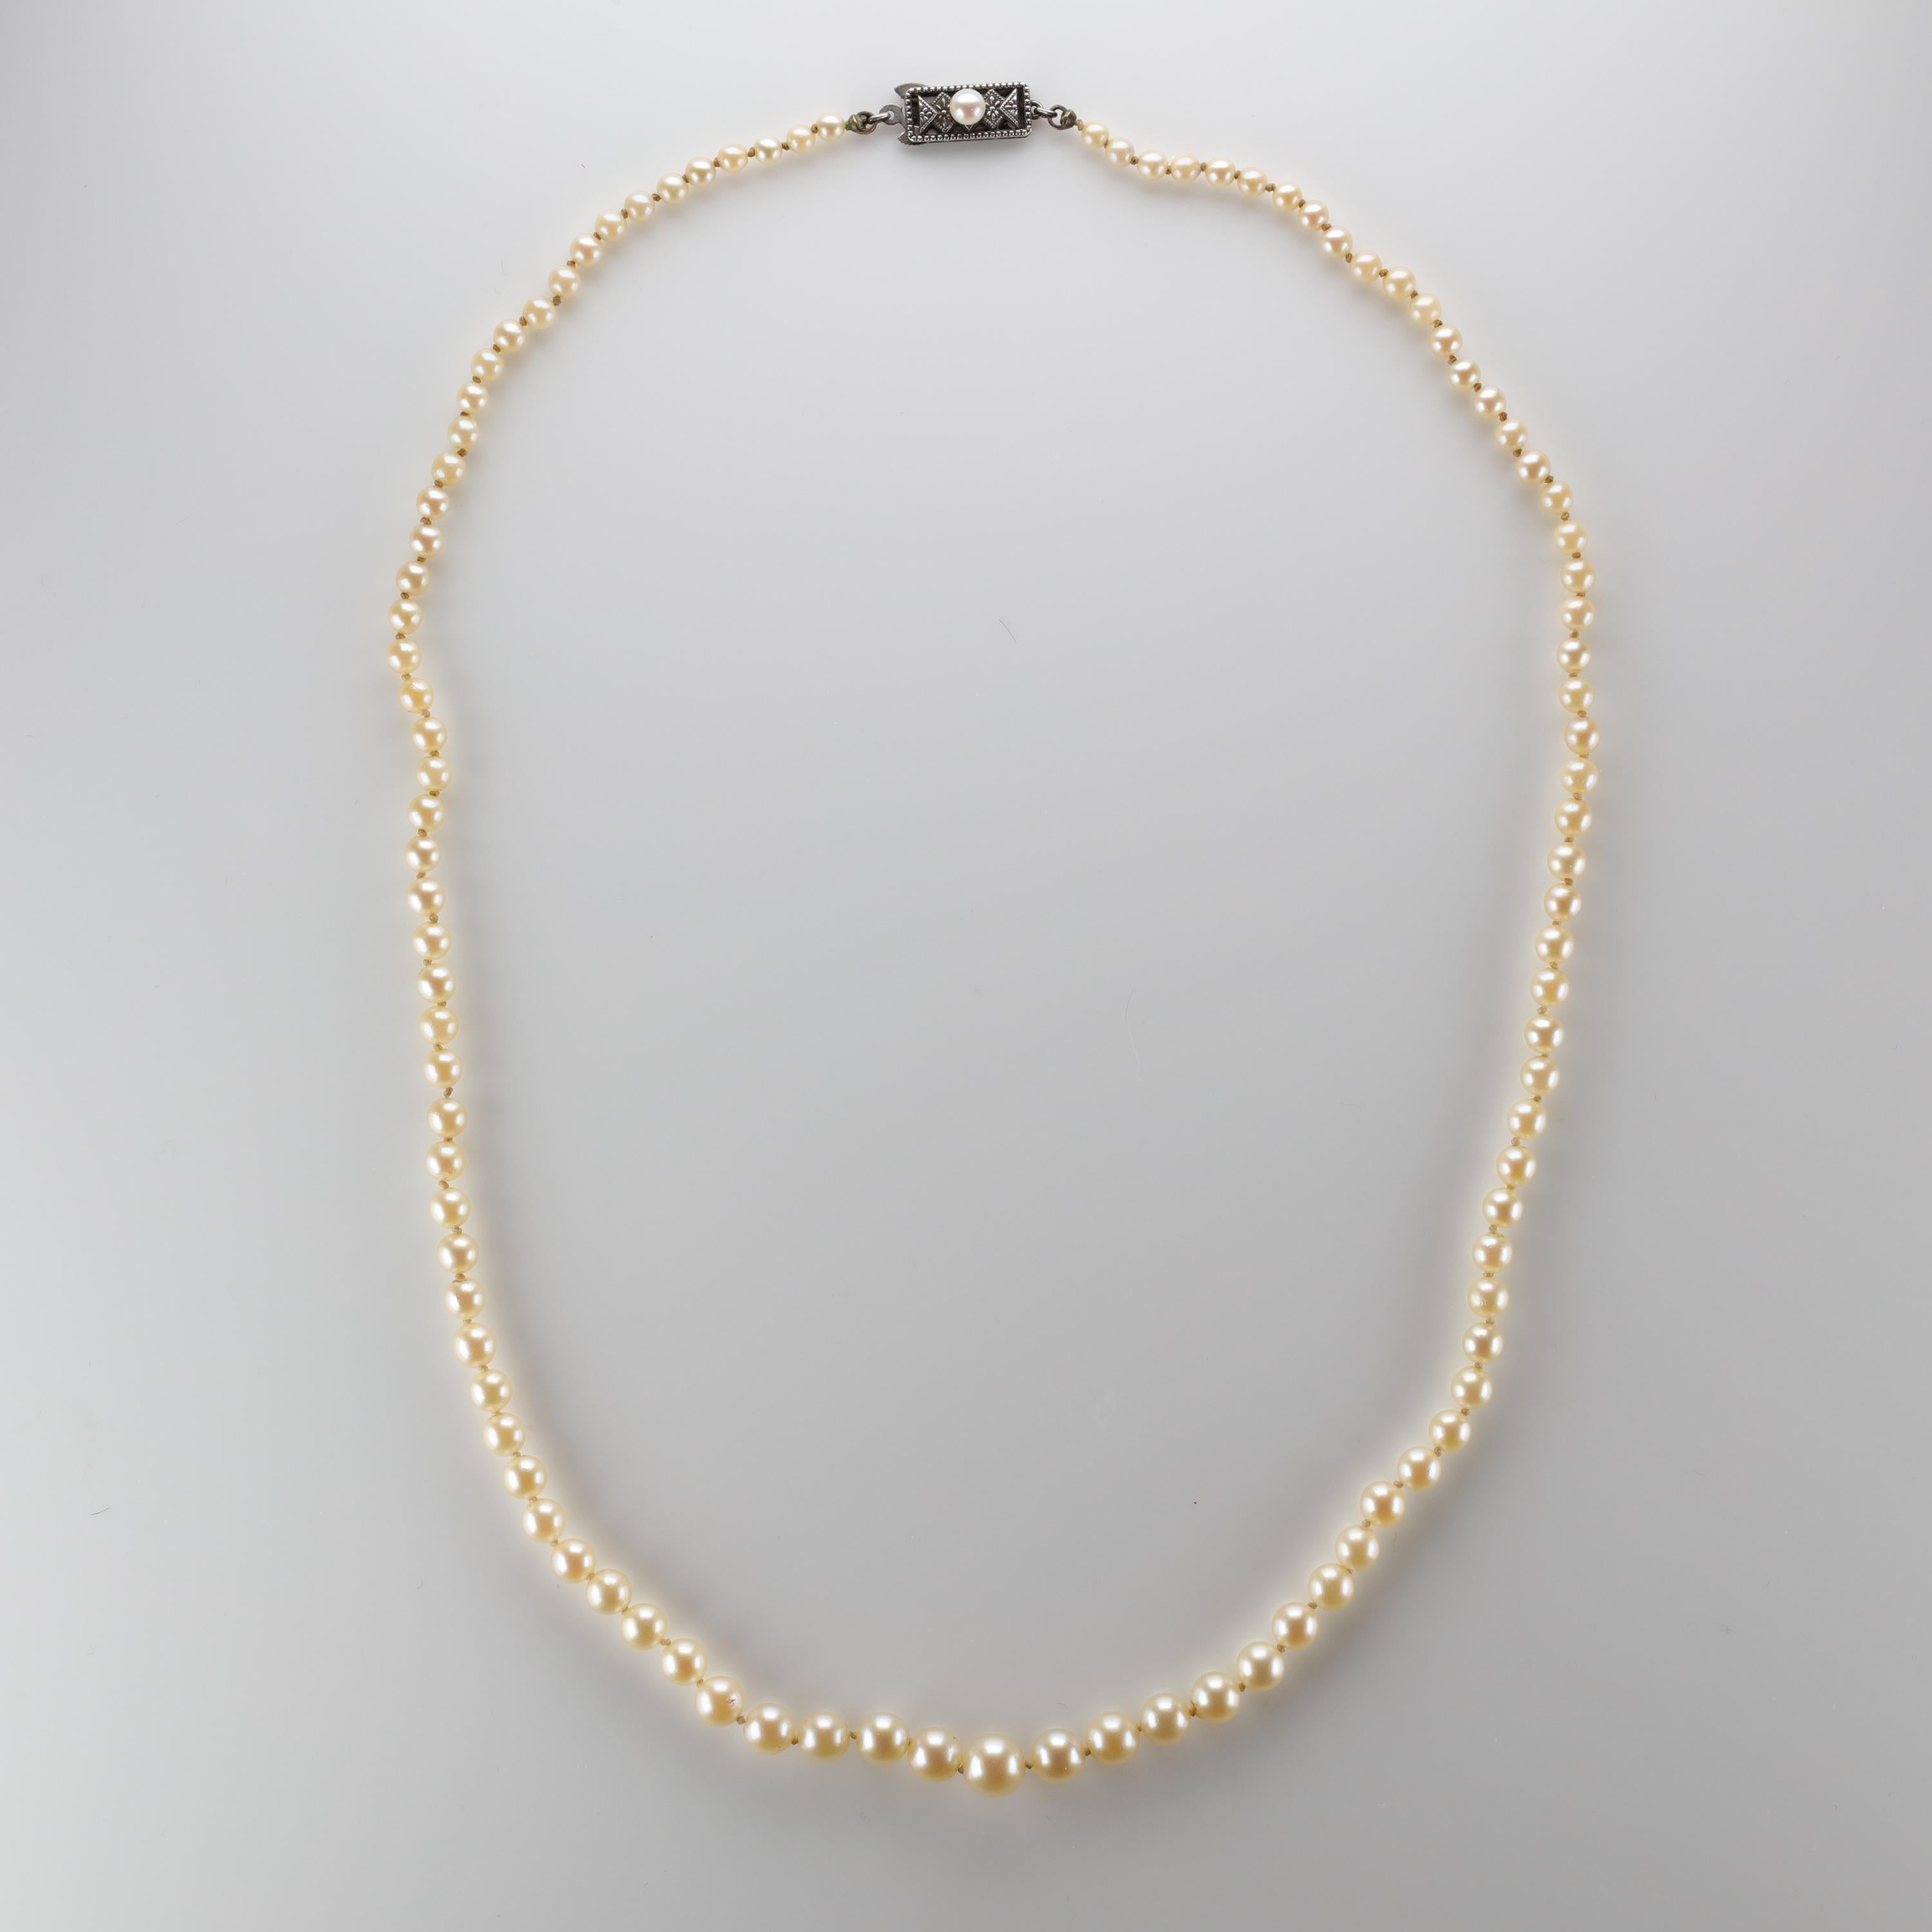 Mikimoto Kōkichi became fascinated with pearls as a young child in Japan. He would in time invent a process for creating what became the first cultured pearl —a blister pearl— and later seed pearls and half-pearls. In 1920 Mikimoto achieved his